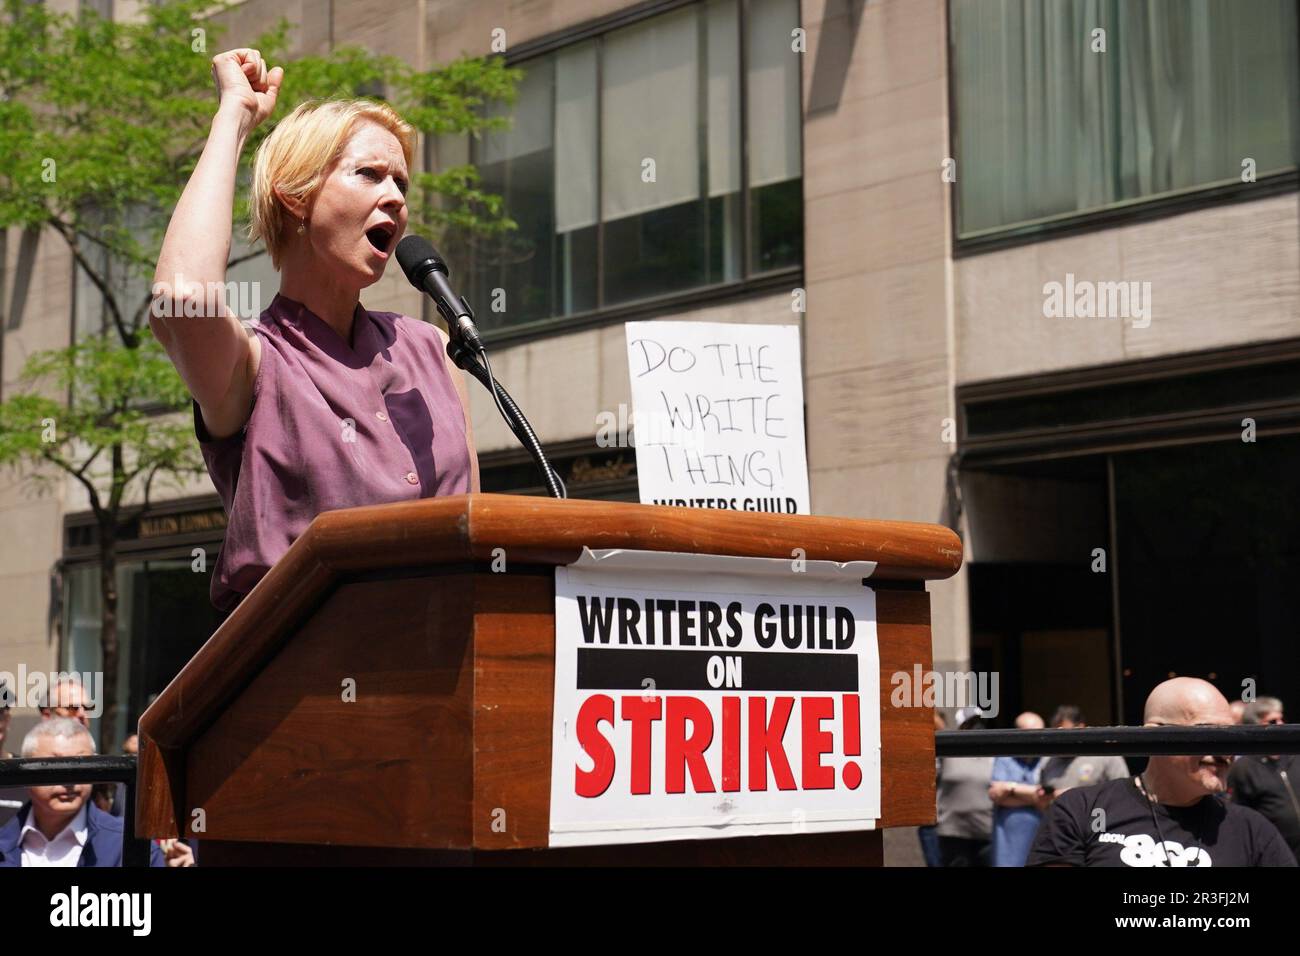 New York, NY, USA. 23rd May, 2023. Cynthia Nixon in attendance for The Writers Guild of America WGA Rally at the Rock, NBCUniversal offices at 30 Rock, New York, NY May 23, 2023. Credit: Kristin Callahan/Everett Collection/Alamy Live News Stock Photo